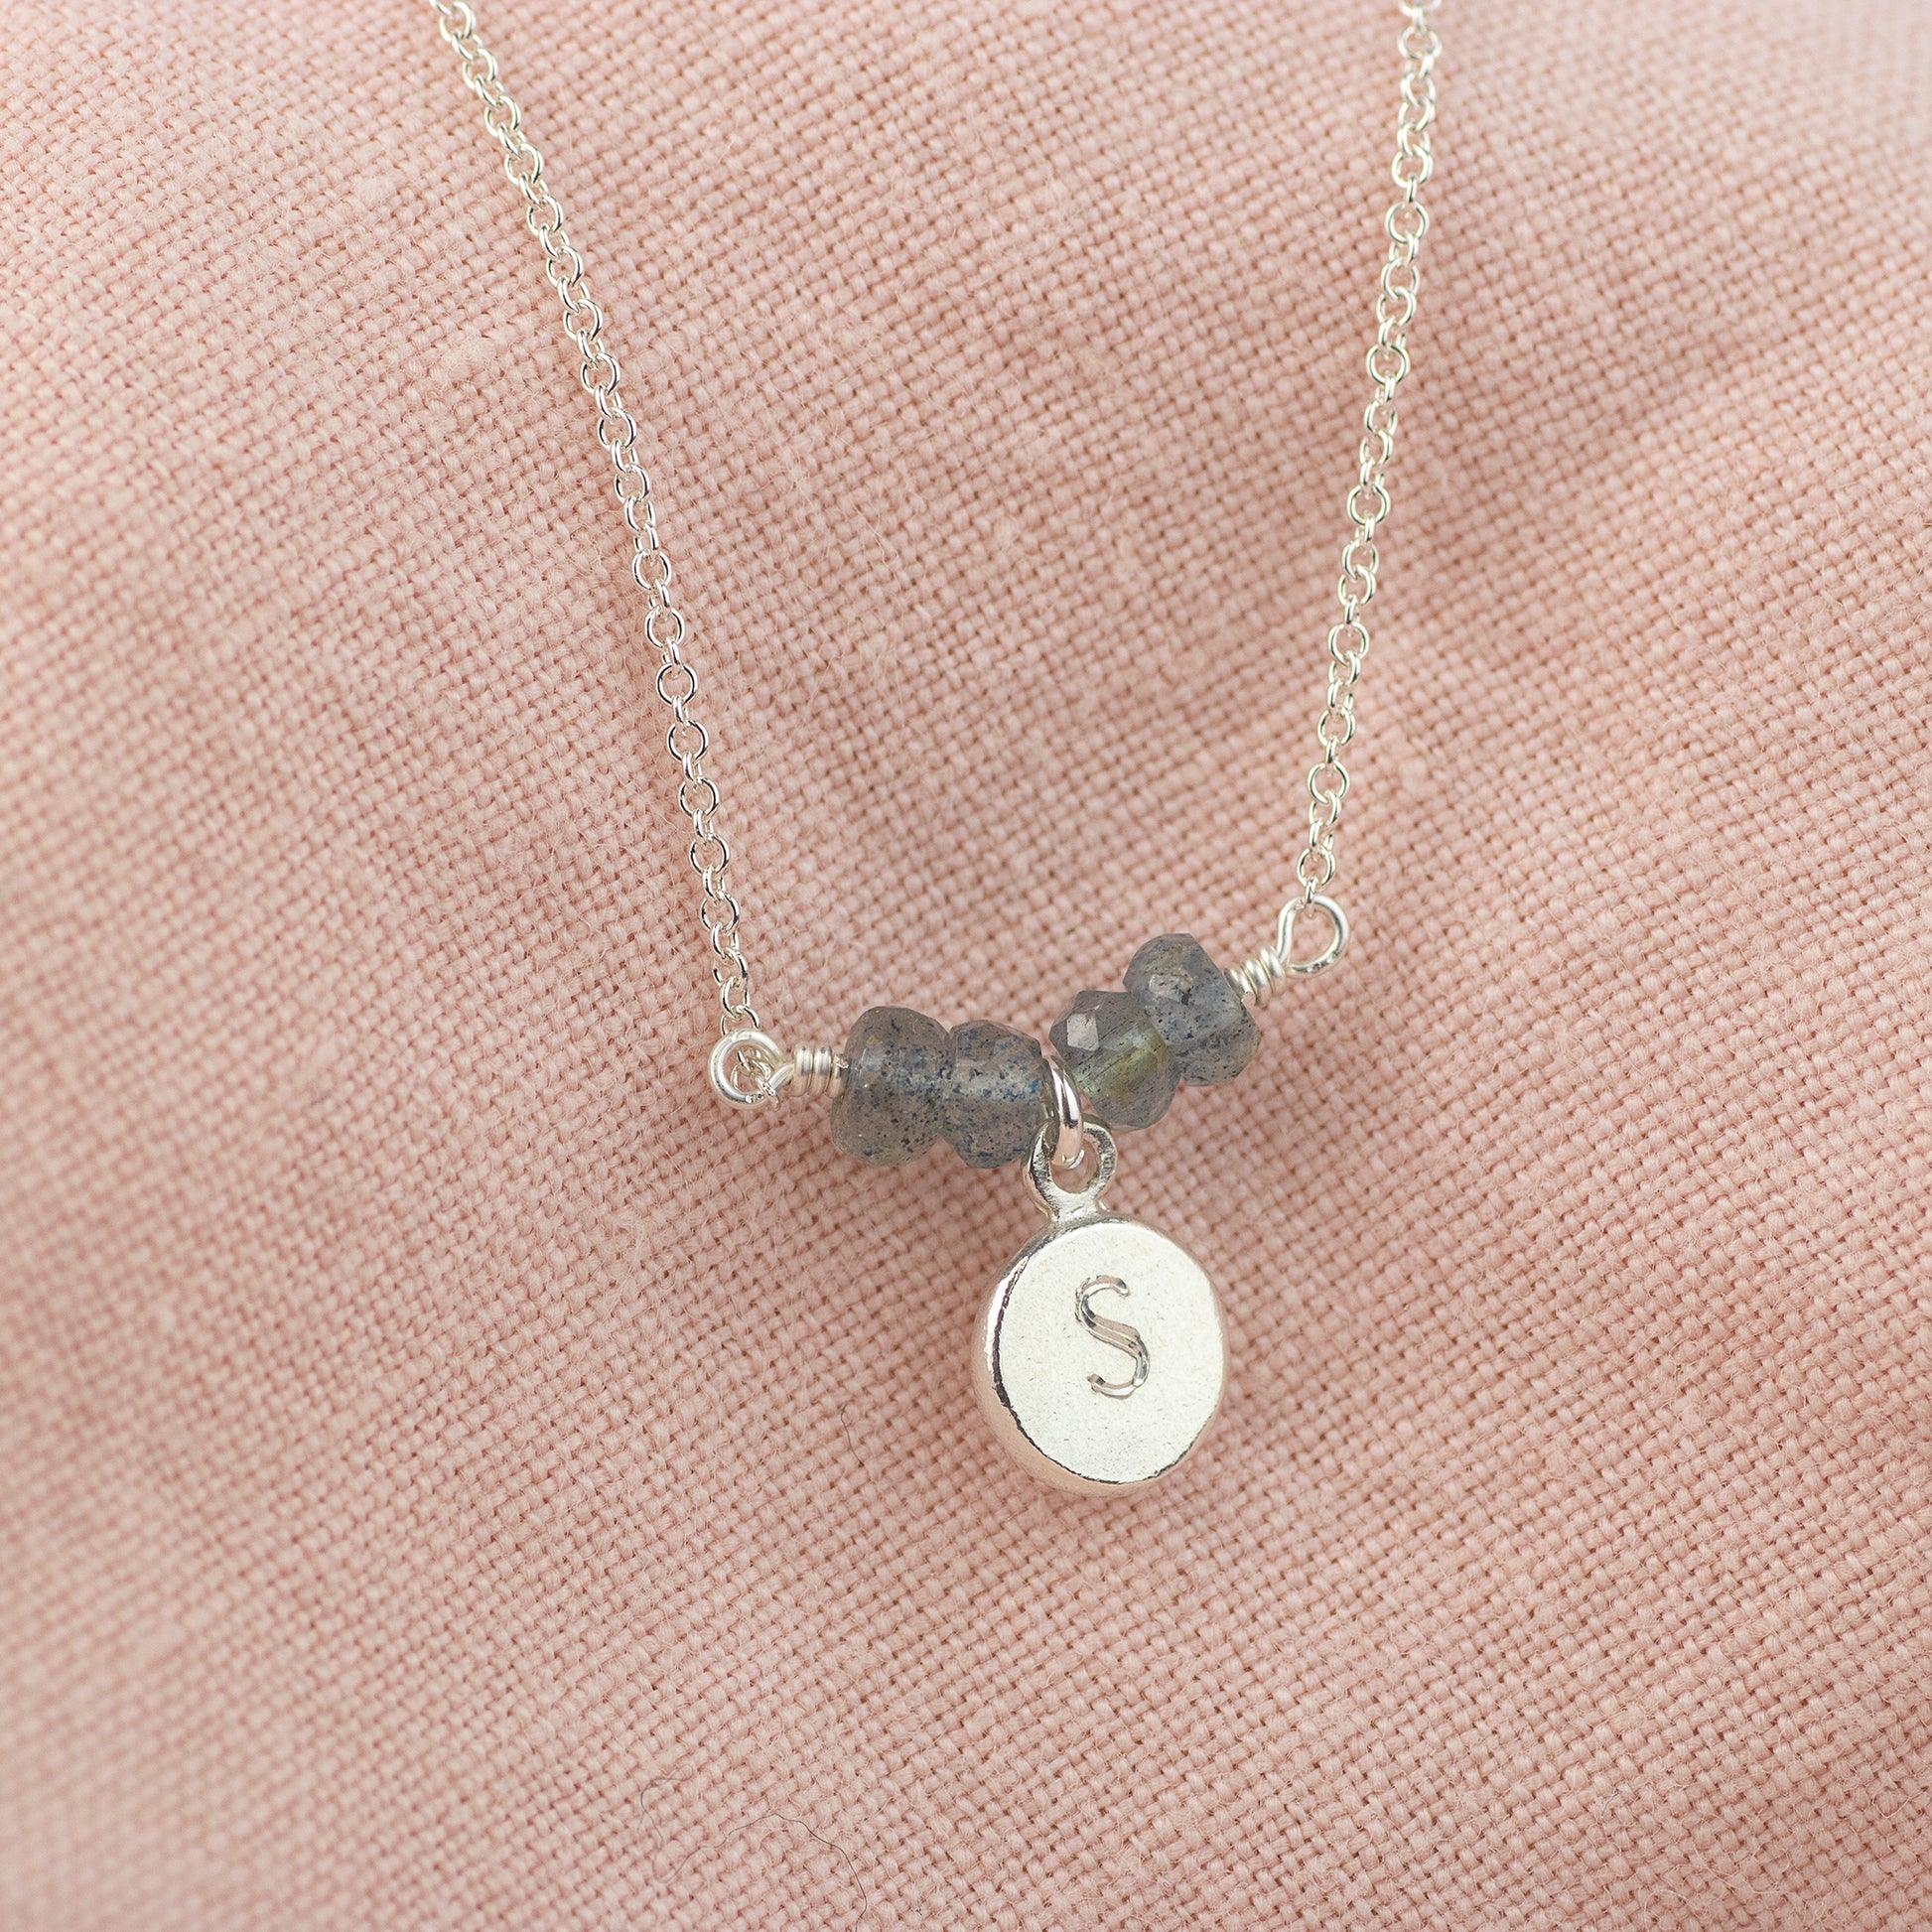 21st Birthday Present - Personalised Engraved Initial Birthstone Necklace